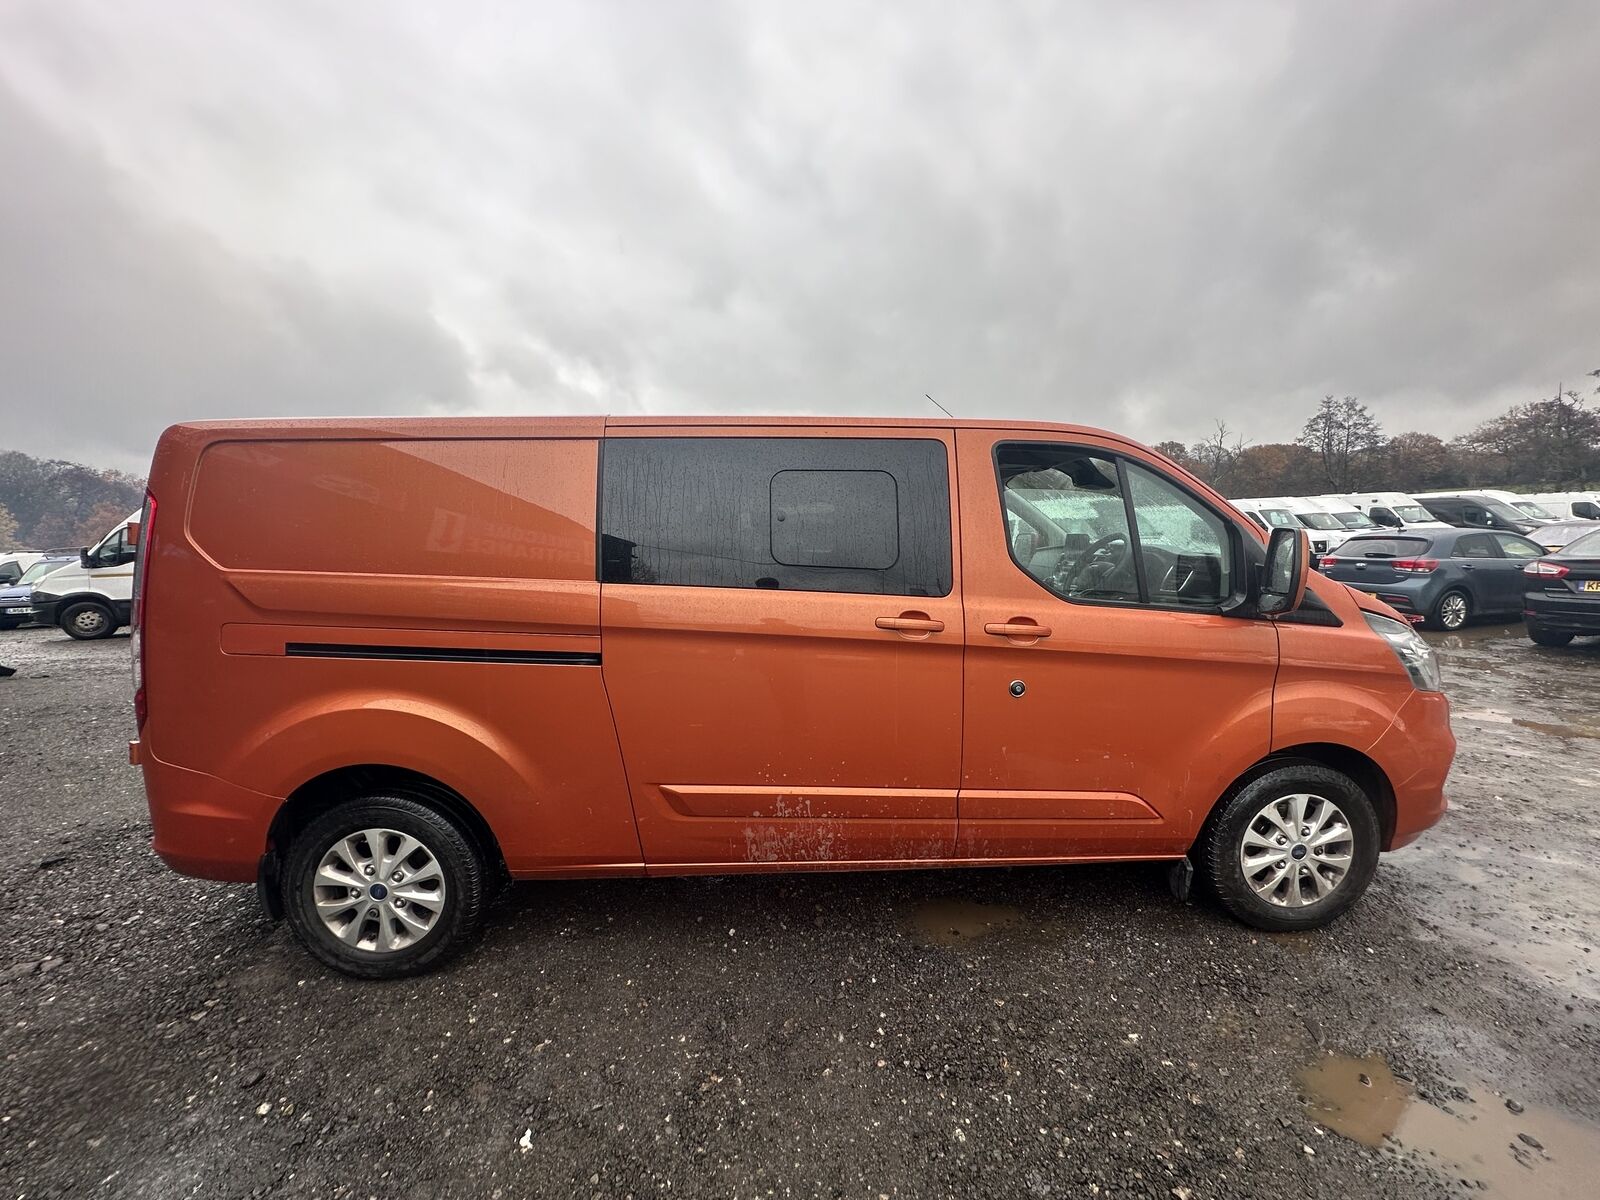 Bid on **(ONLY 89K MILEAGE)** UNIQUE 68 PLATE TRANSIT CUSTOM CREW CAB - FACTORY FIT (NO VAT ON HAMMER)- Buy &amp; Sell on Auction with EAMA Group